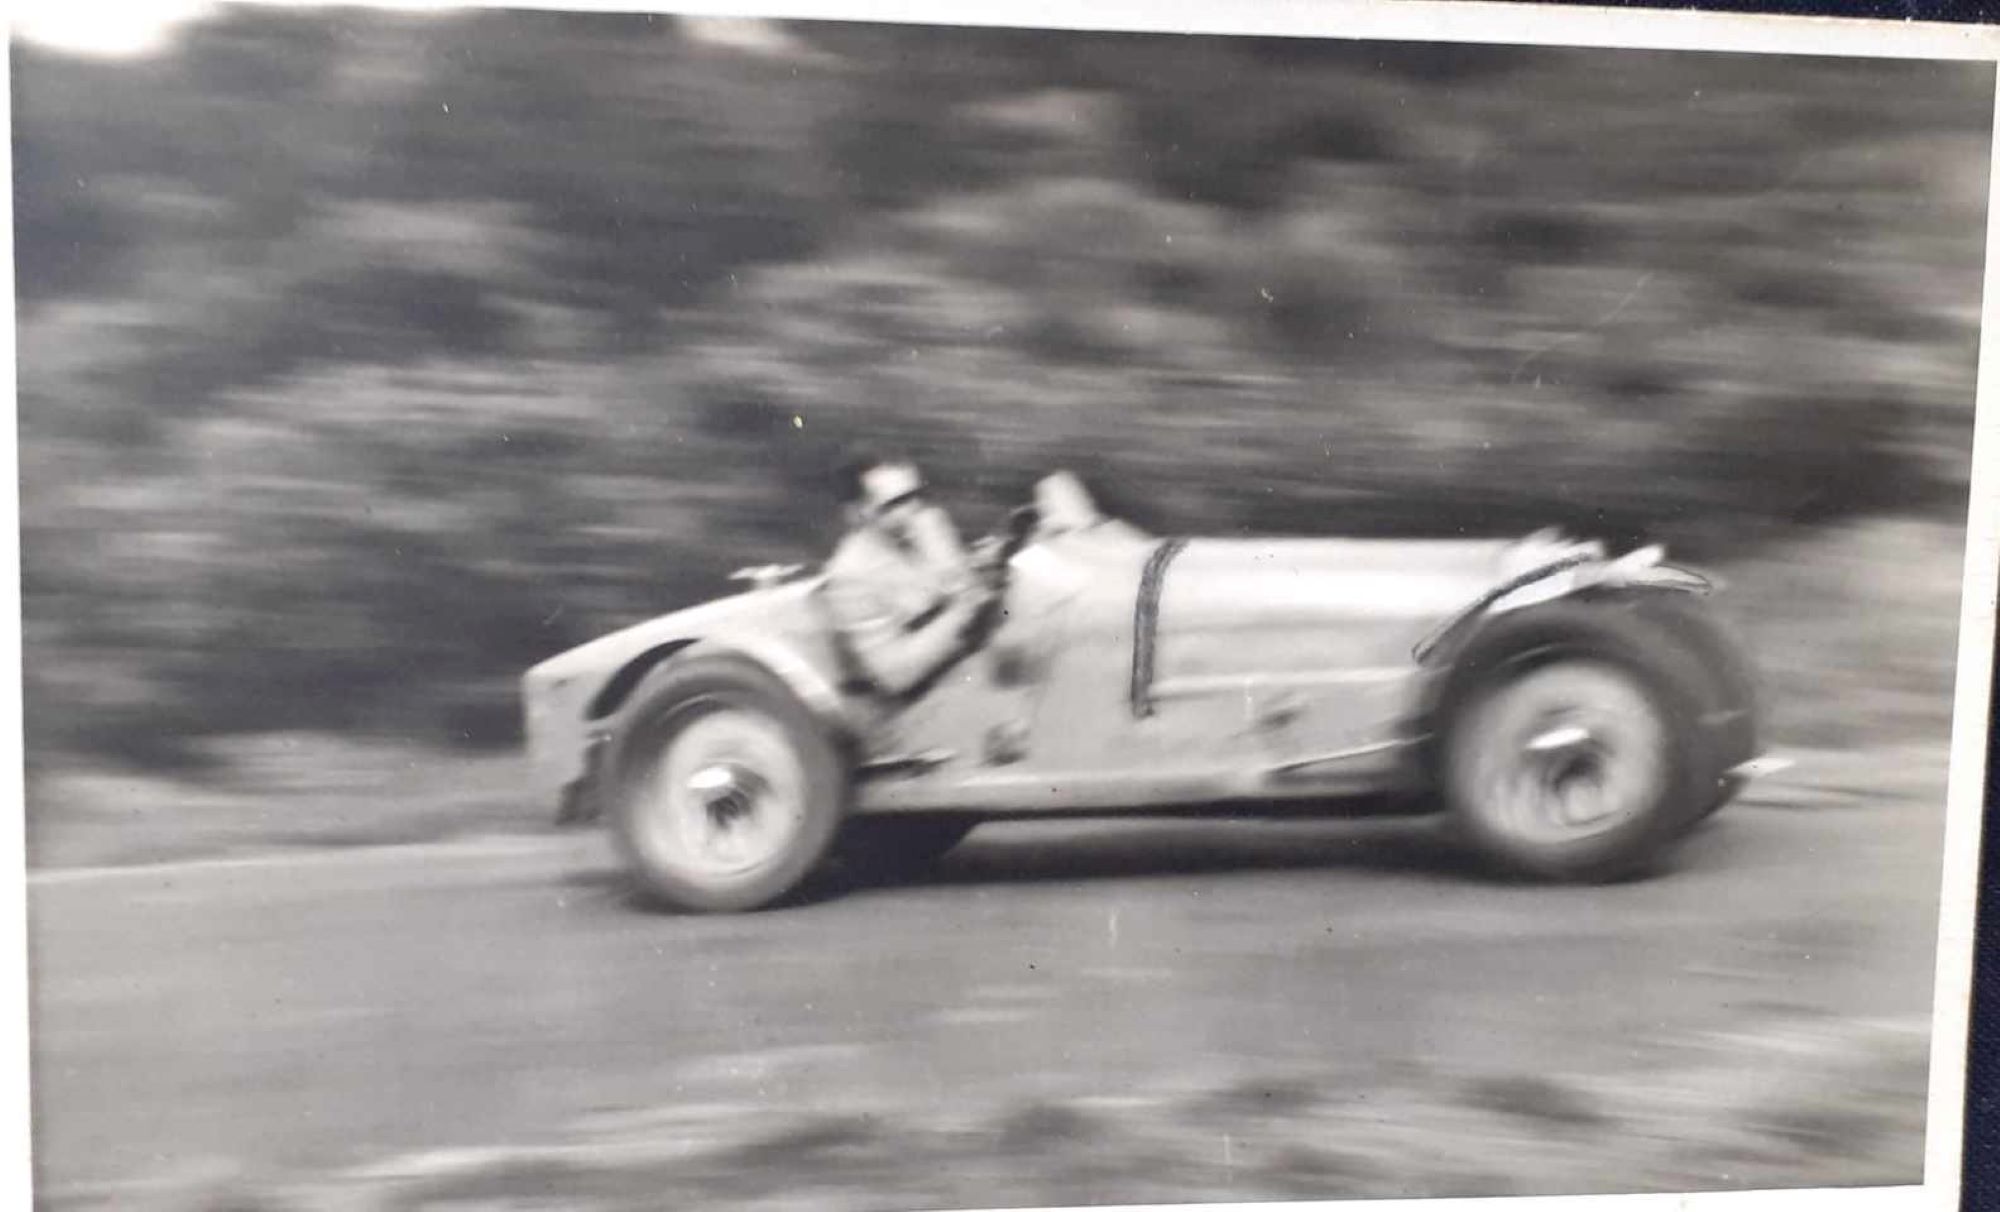 Name:  NSCC 1950 #0116 Bugatti T35 at speed - light colour 1950's - image Graeme Wells arch Anthony Wel.jpg
Views: 160
Size:  158.1 KB